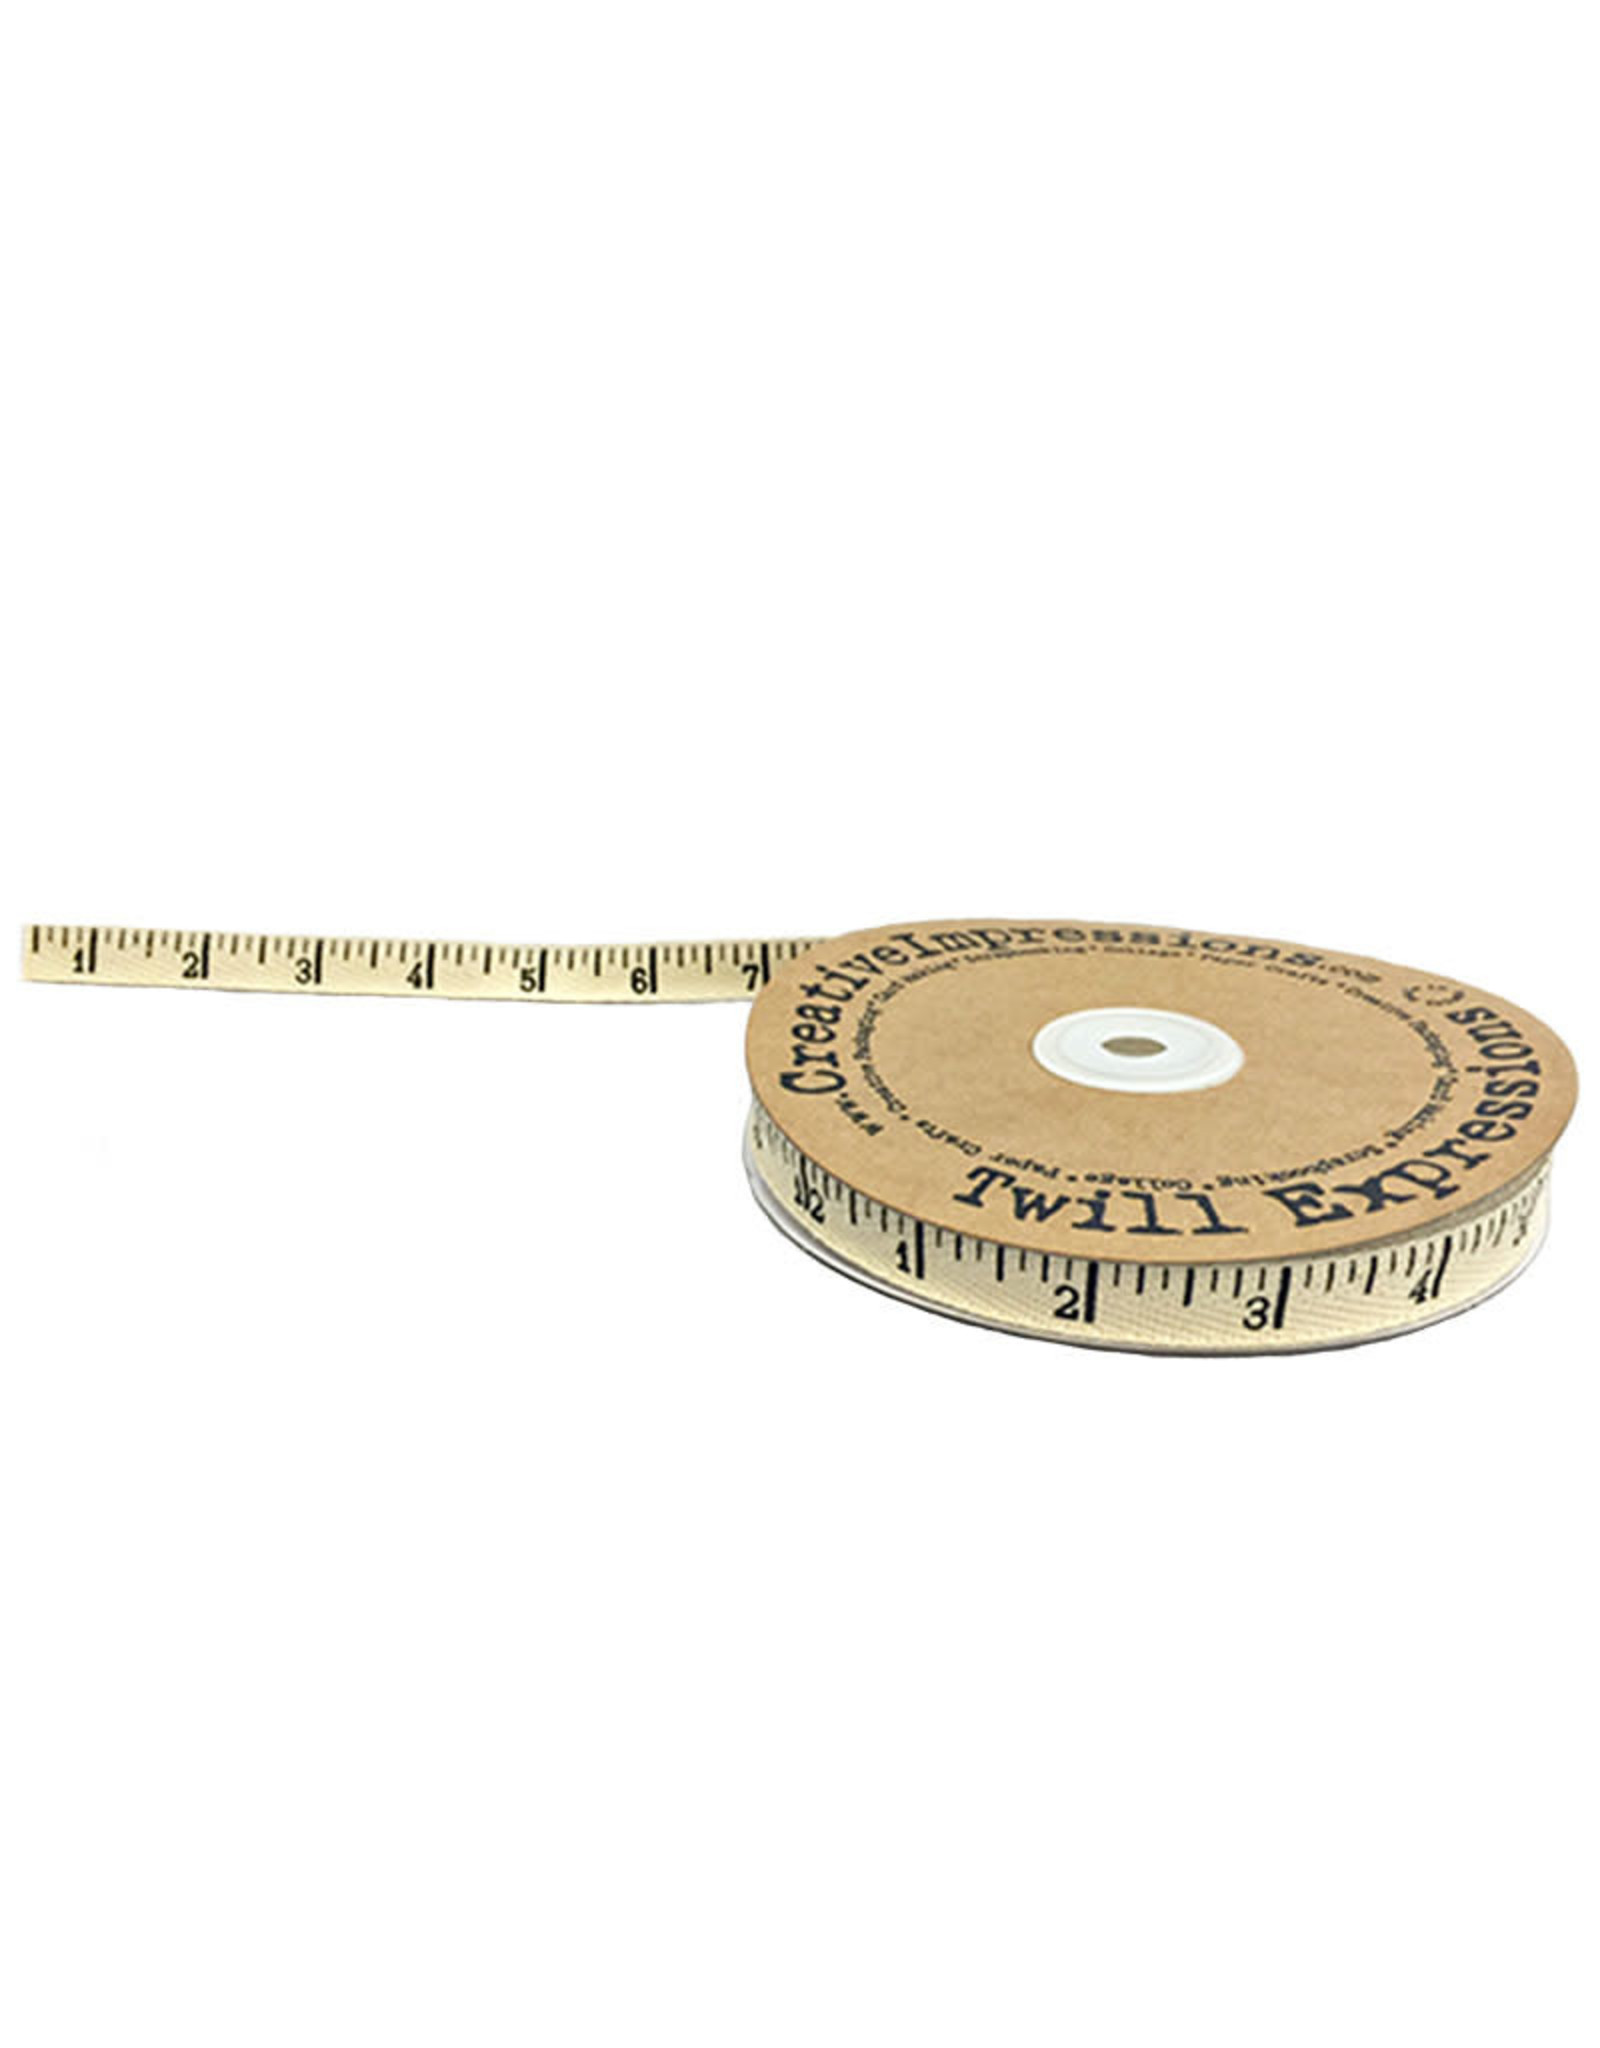 Picking Daisies Antique Ruler Twill Tape, Natural, by the Yard, 1/2 inch wide